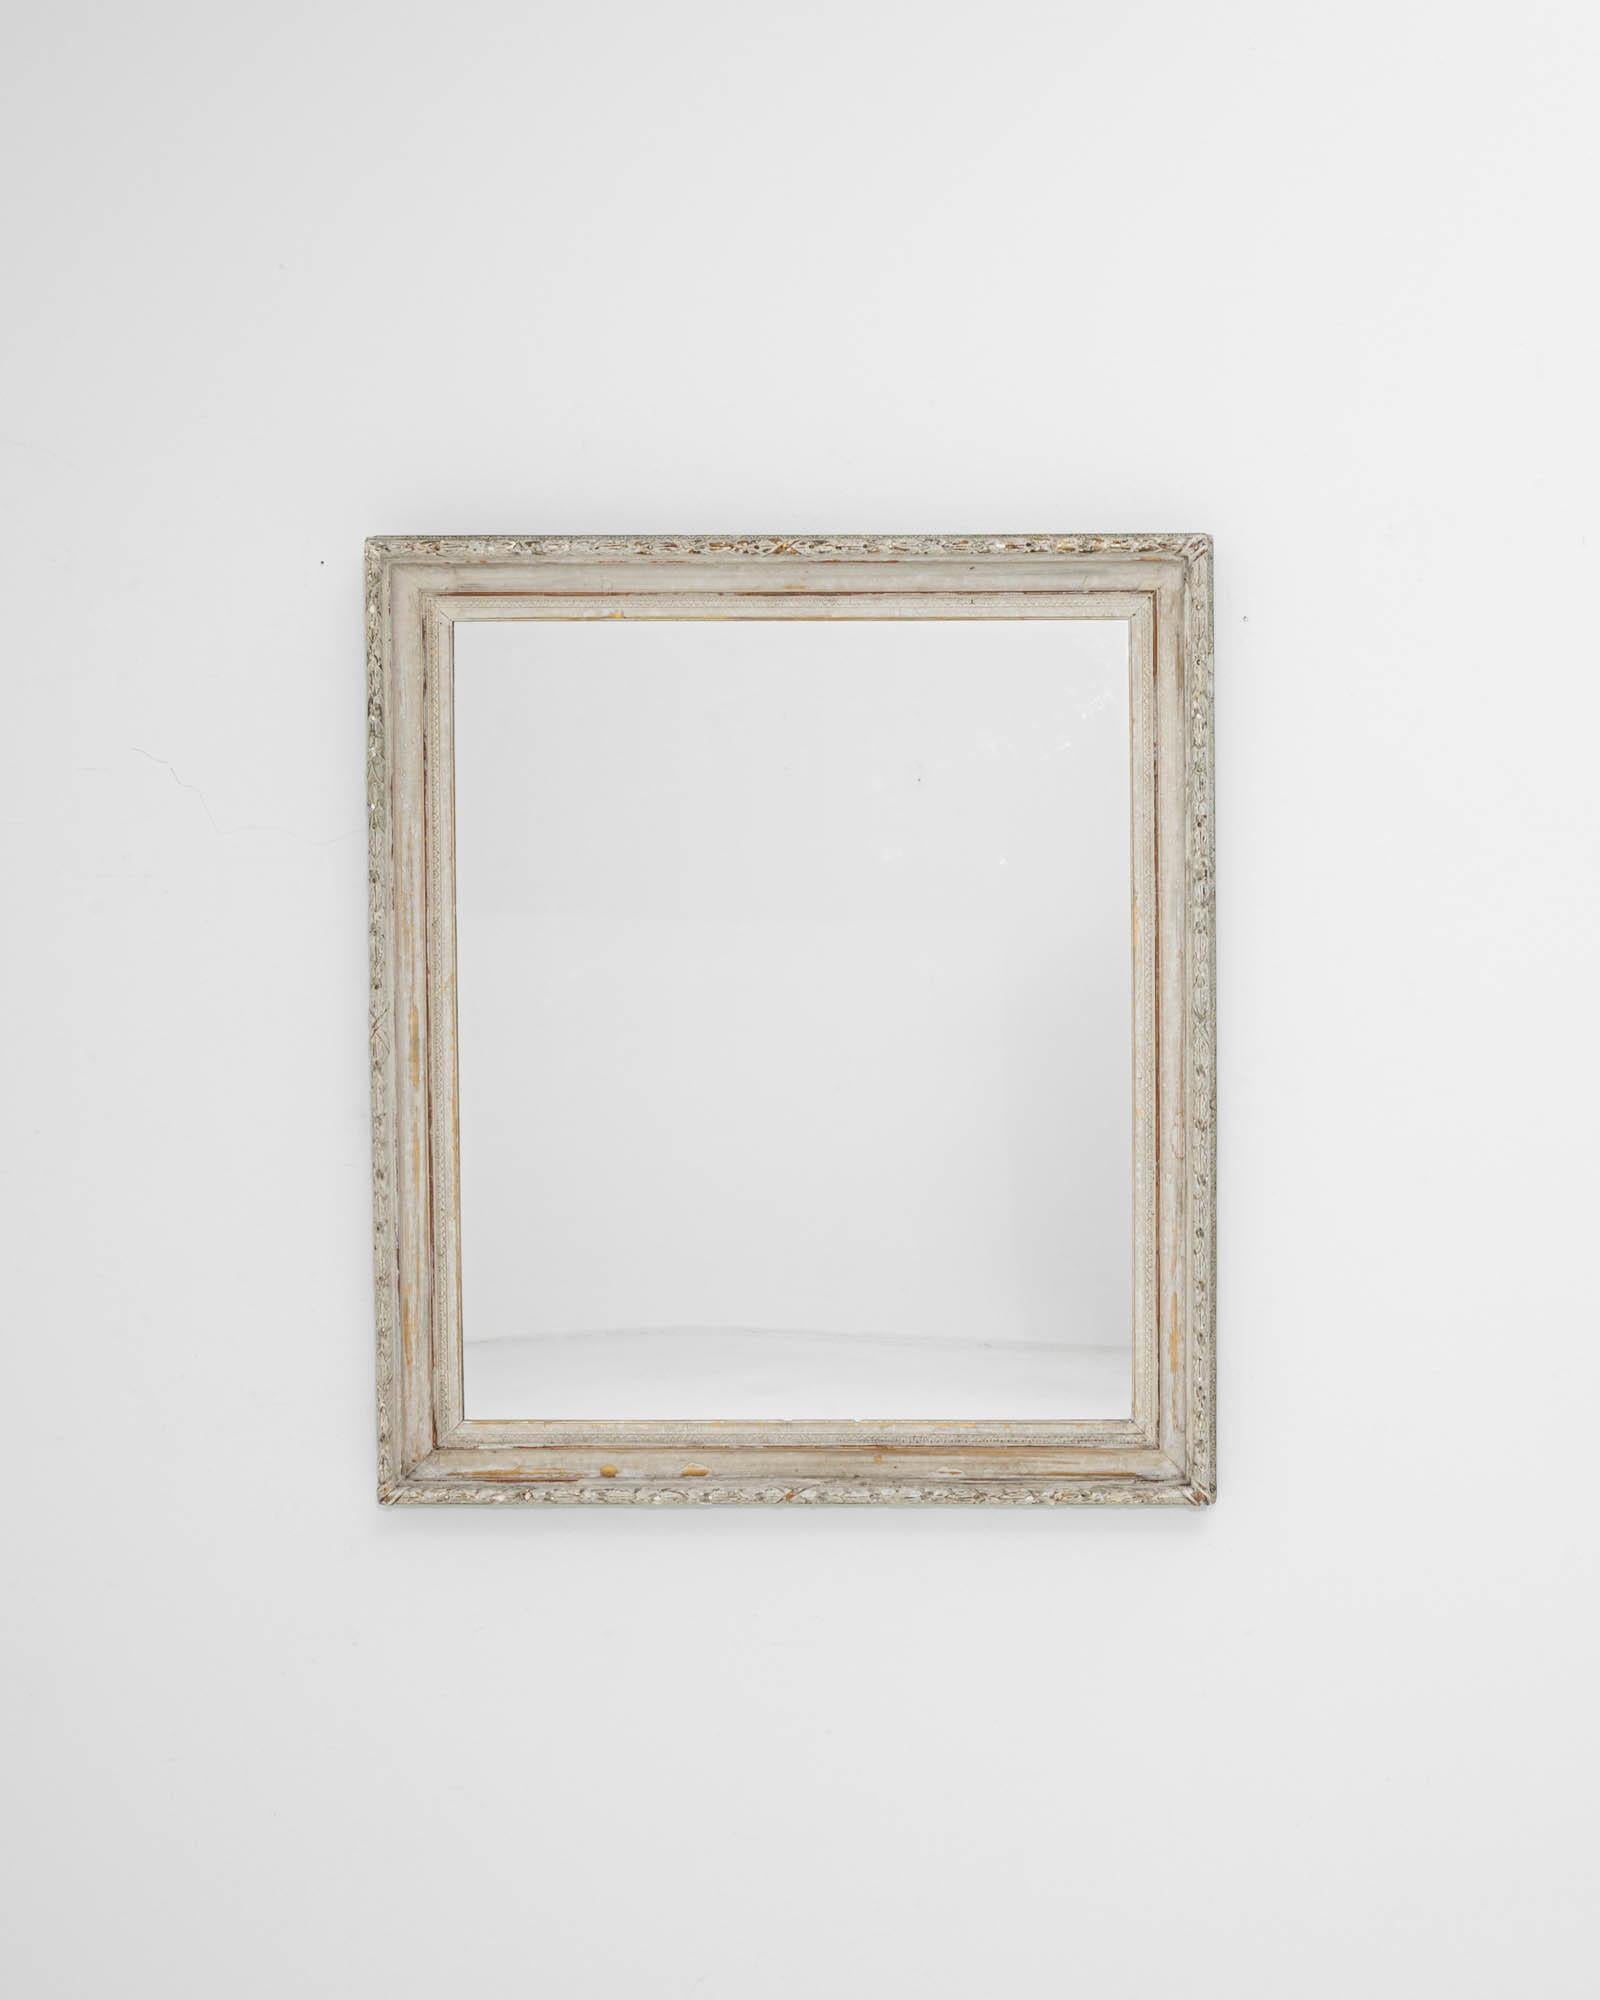 A wooden mirror created in 19th century France. The time-touched frame, adorned with captivating detail, leads the eye around its edges. The white patina has enhanced with age, drawing one in for a closer inspection. Profiled edges were sculpted